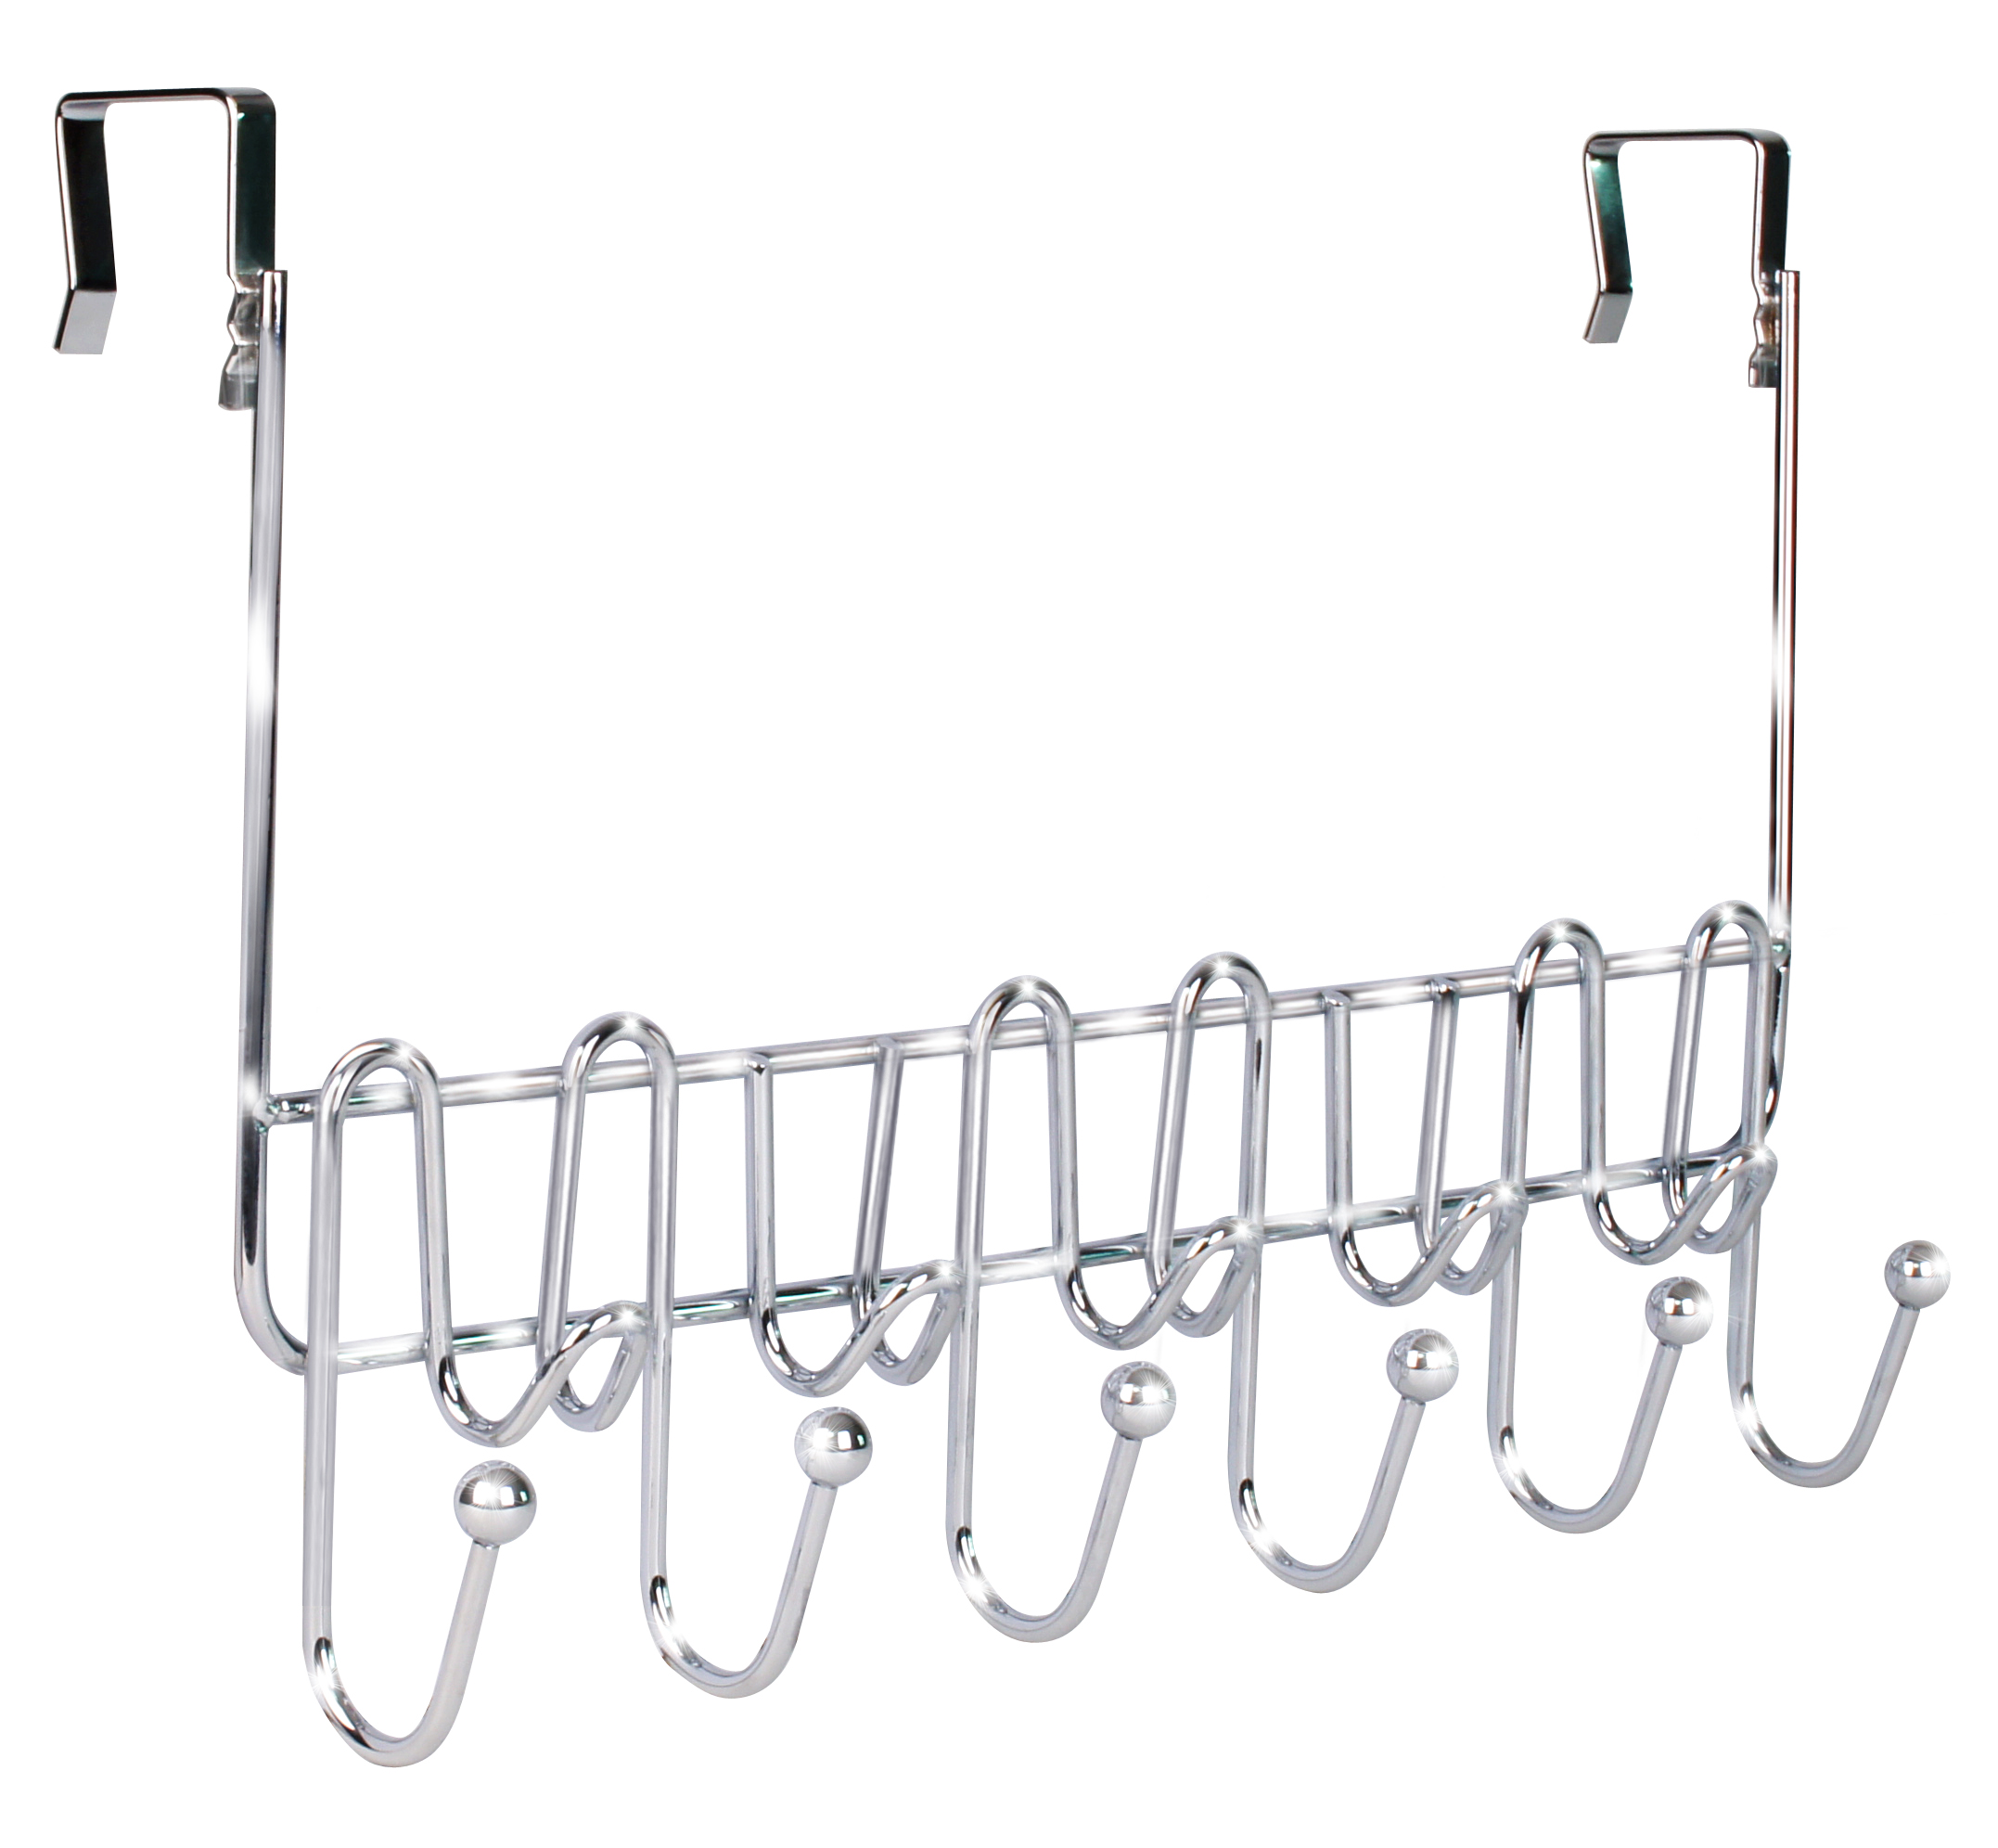 Deco Brothers Pan Organizer Rack for Kitchen Cabinet and Counter, Bronze